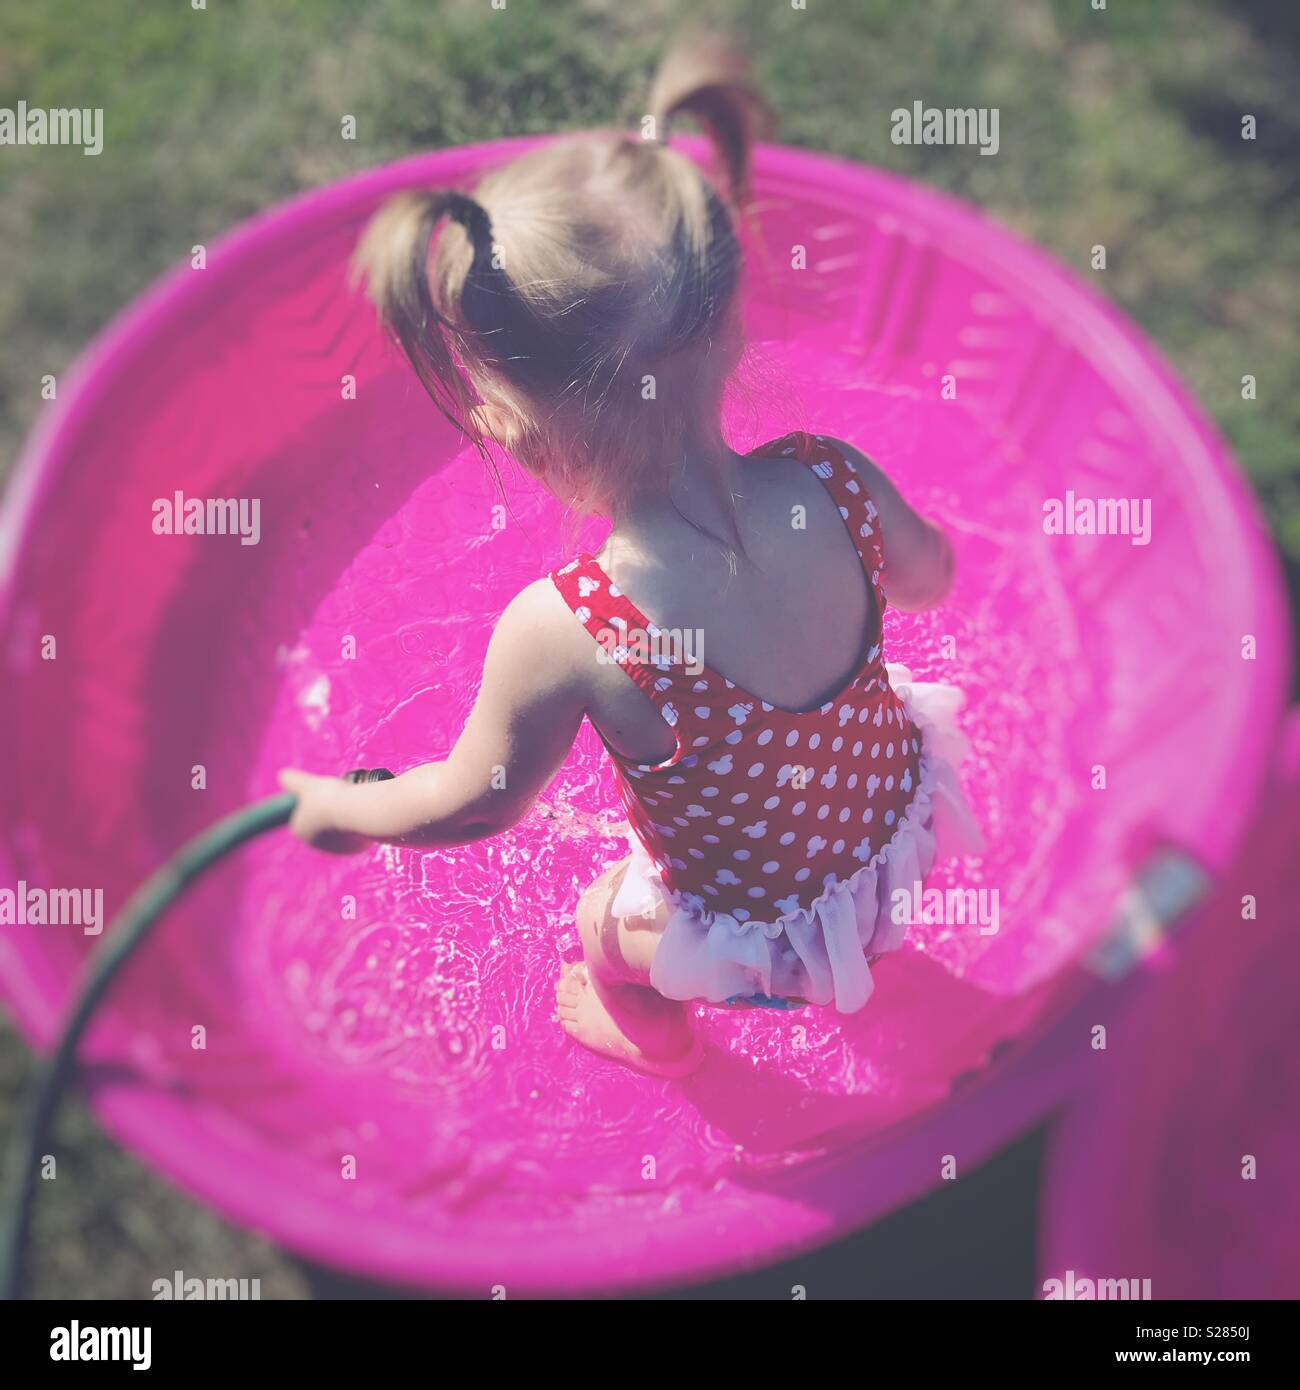 Toddler girl with pigtails filling a kiddie pool with a hose Stock Photo